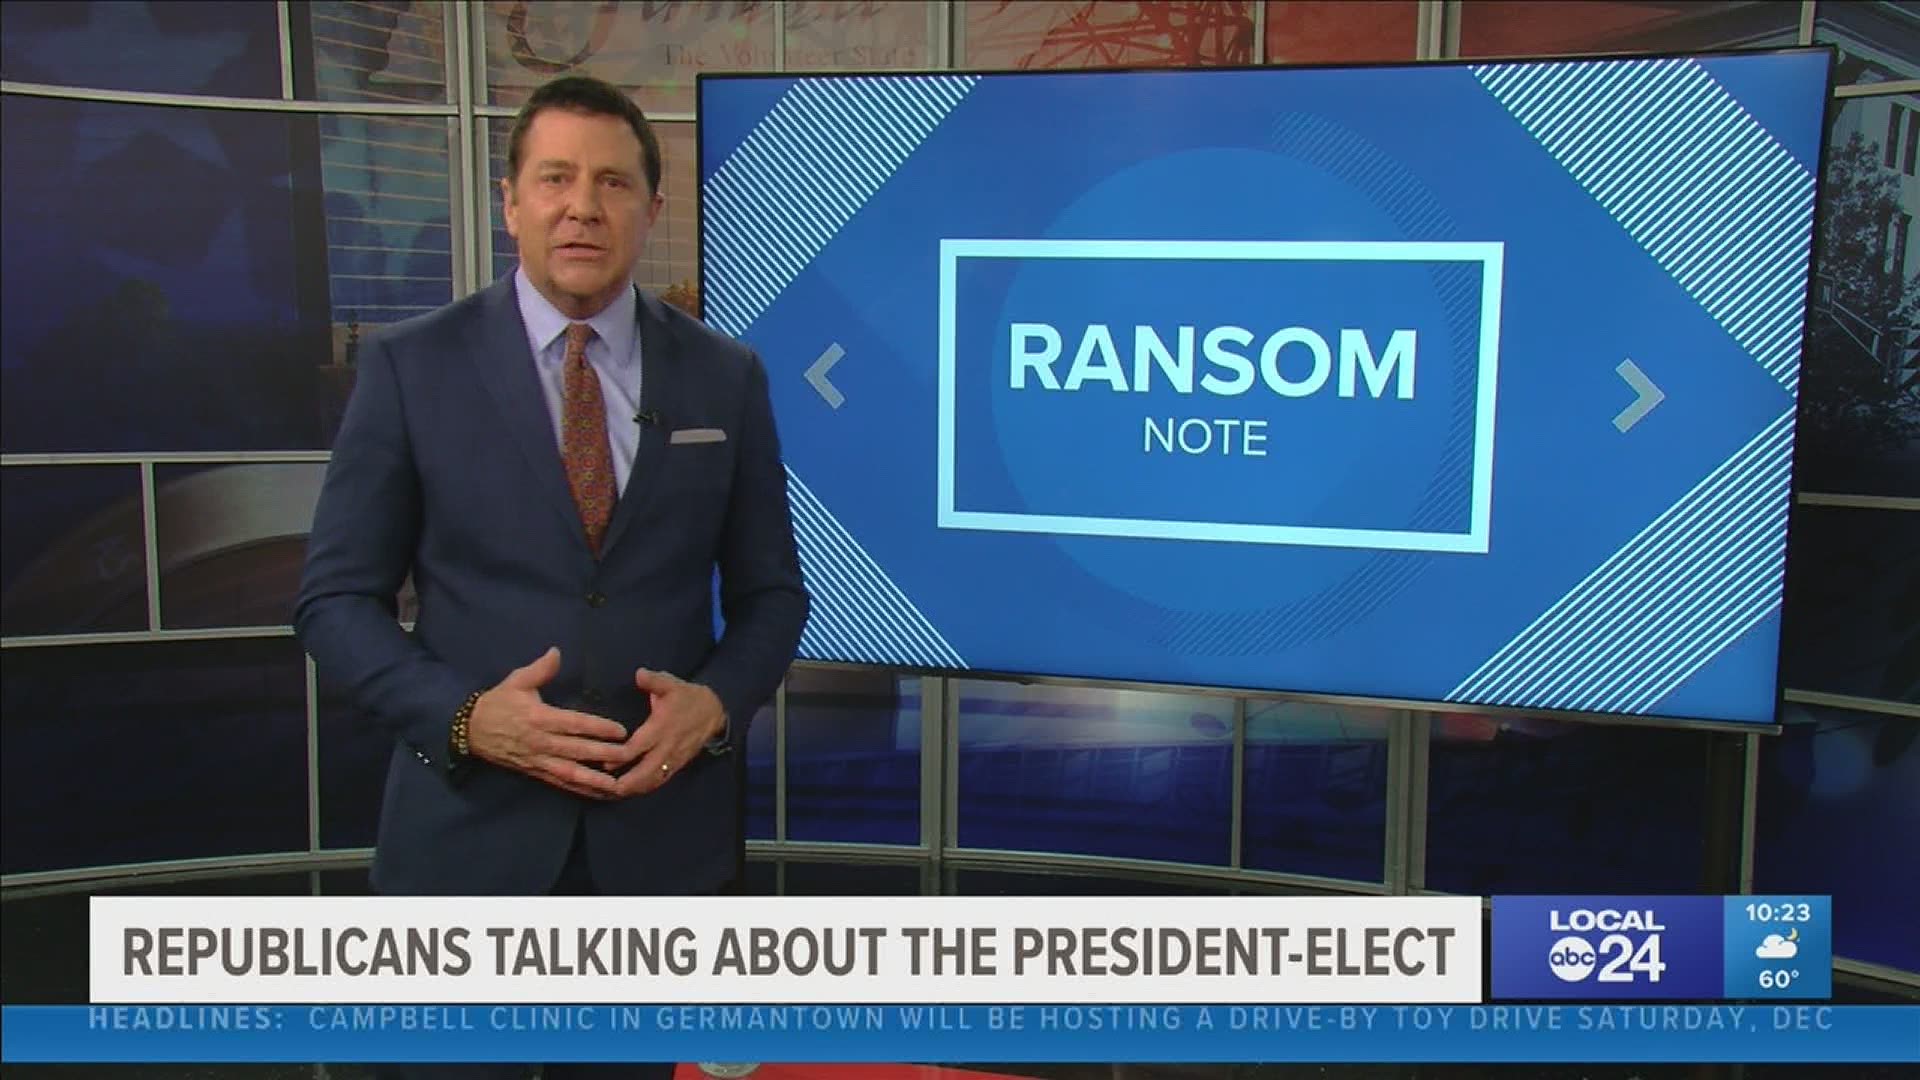 Local 24 News Anchor Richard Ransom discusses in his Ransom Note that it is time for local Congressmen and Governors to face the truth: Biden is the President Elect.